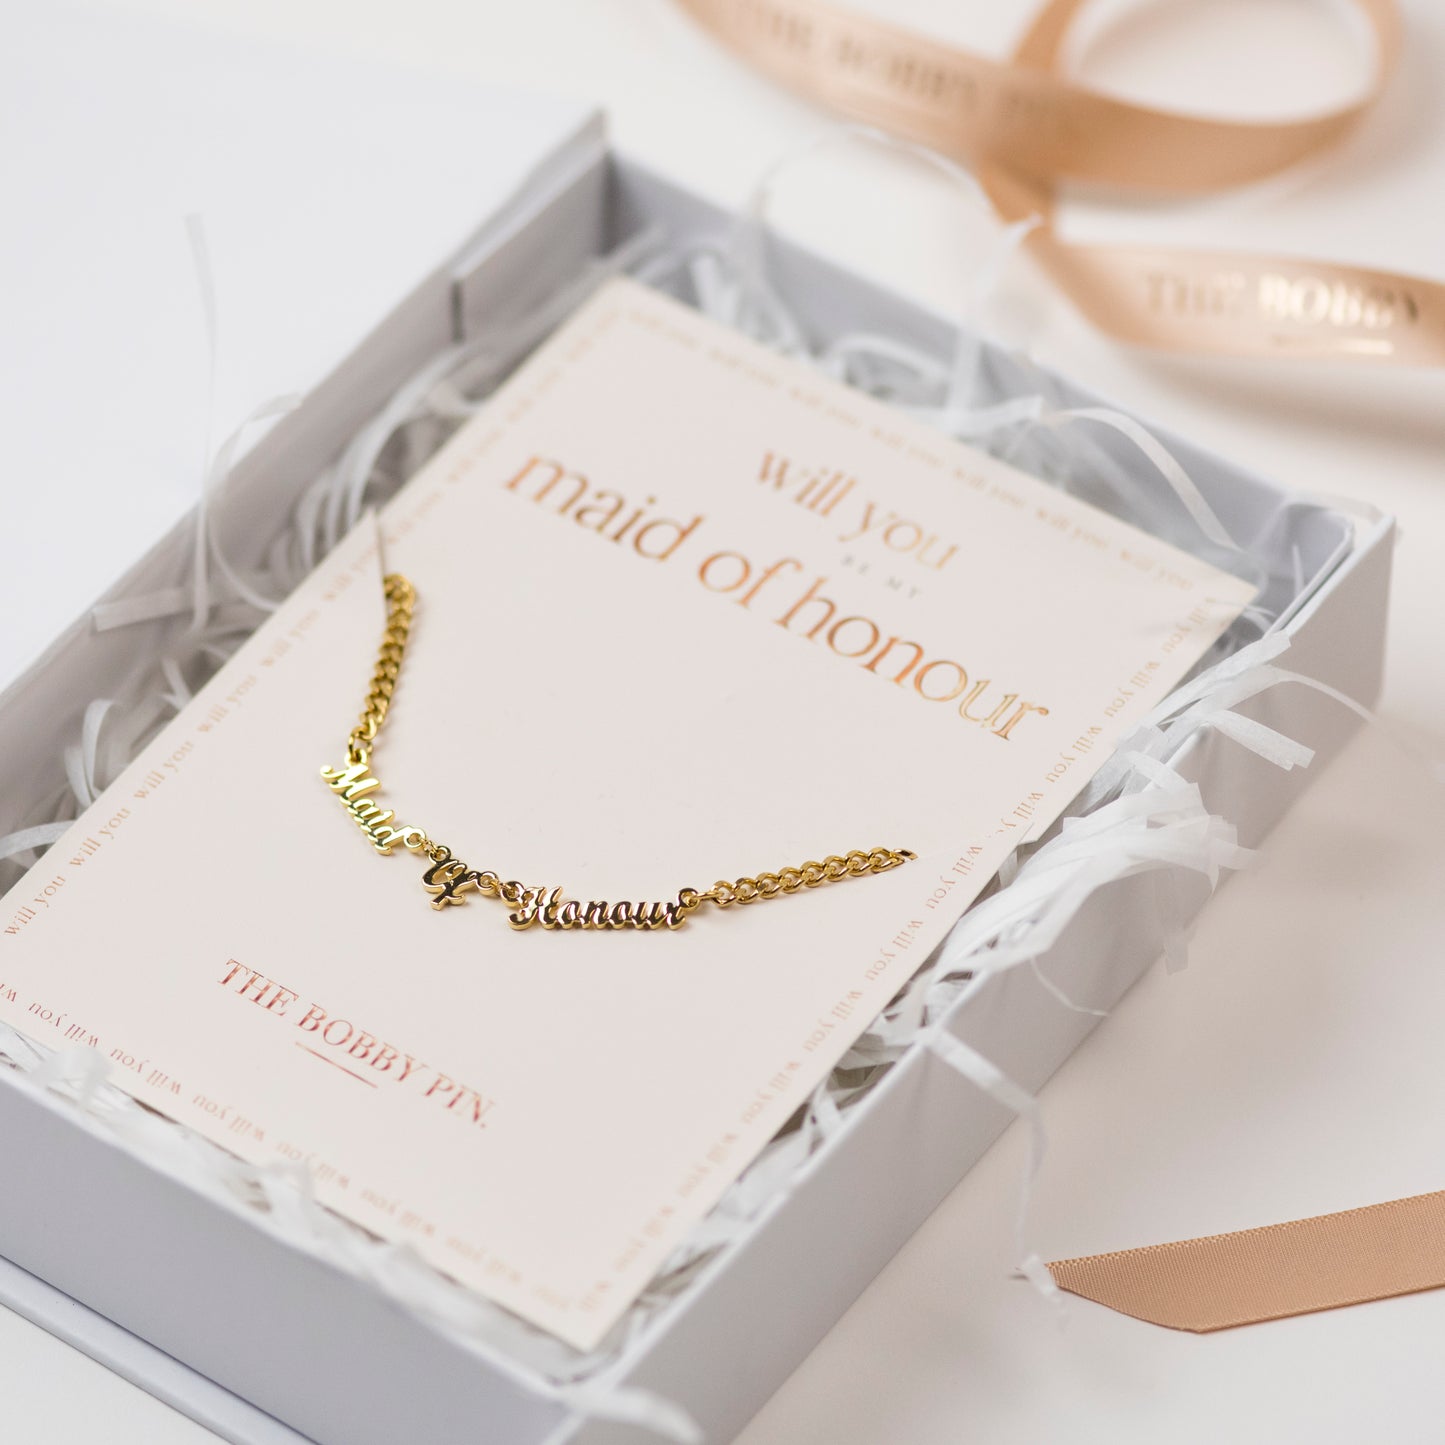 Maid Of Honour Necklace Proposal